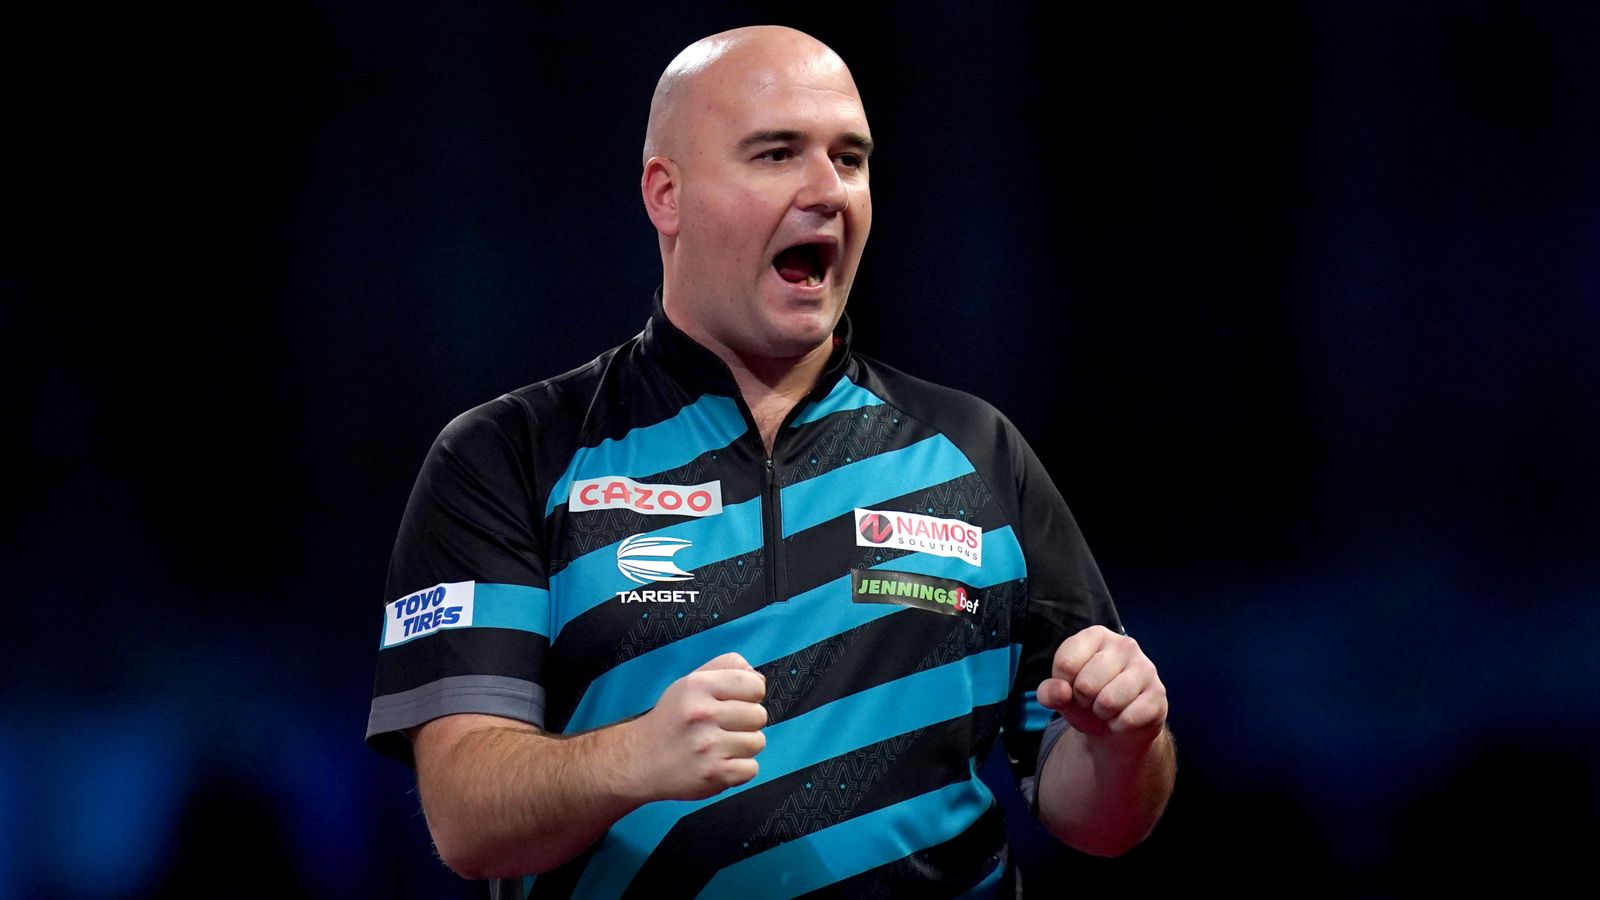 World Cup of Darts: Rob Cross, Gary Anderson to take part as Australia aim to defend their title | Darts News